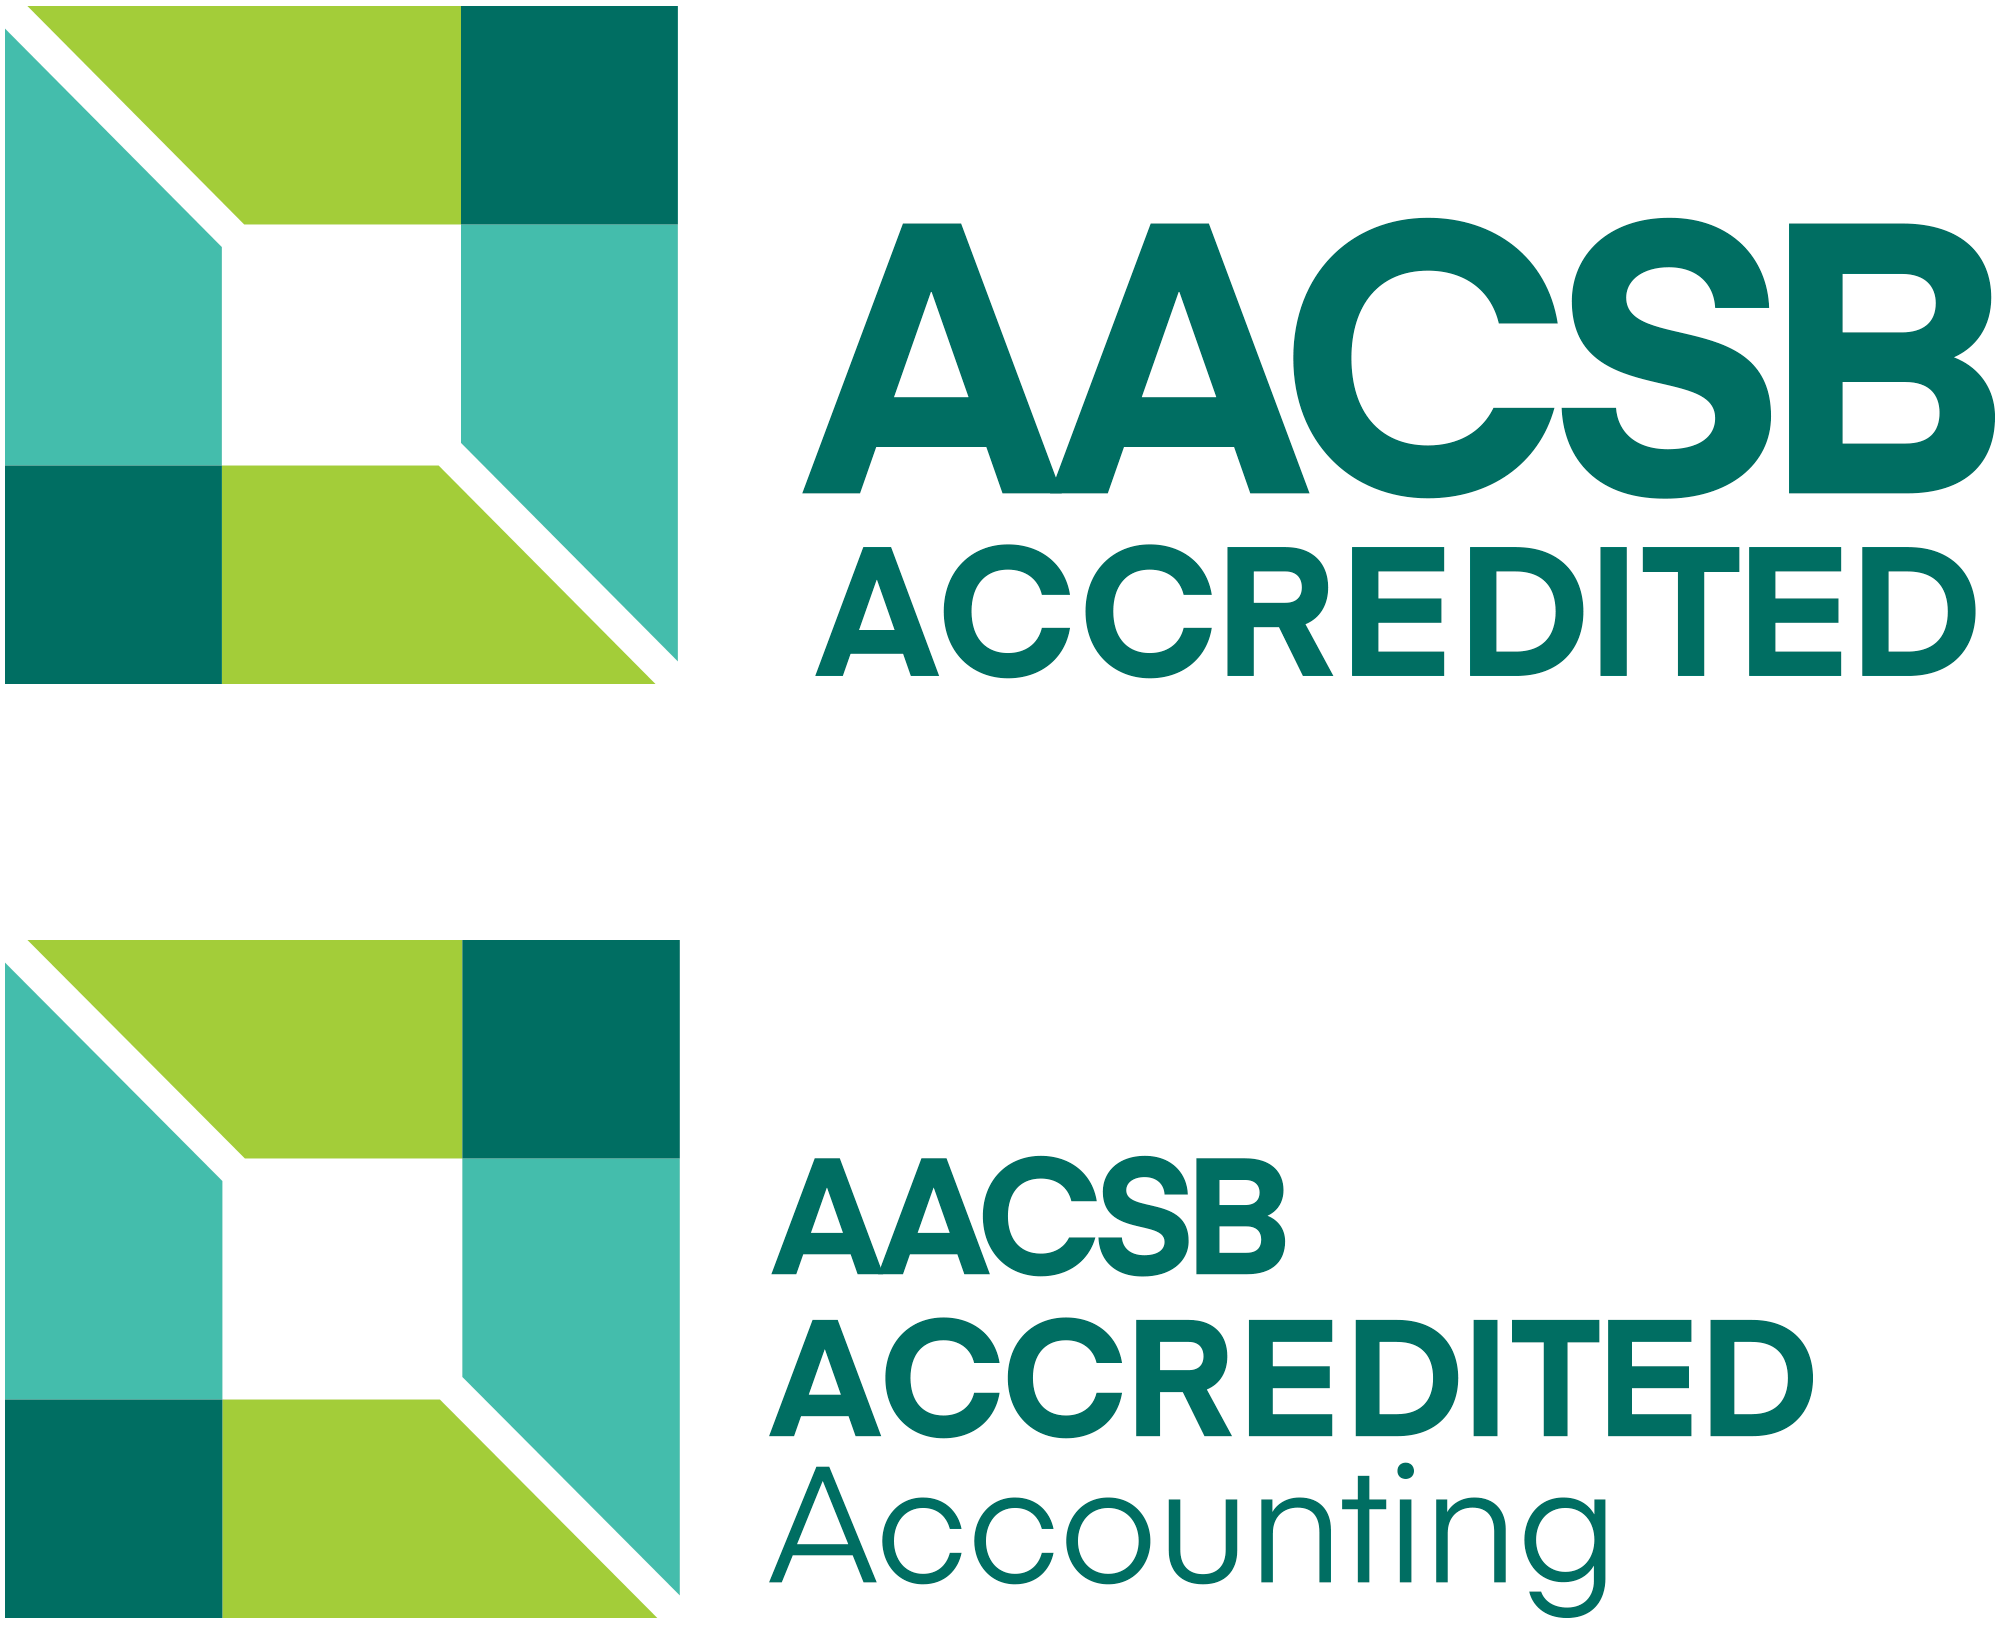 AACSB logos for business and accounting